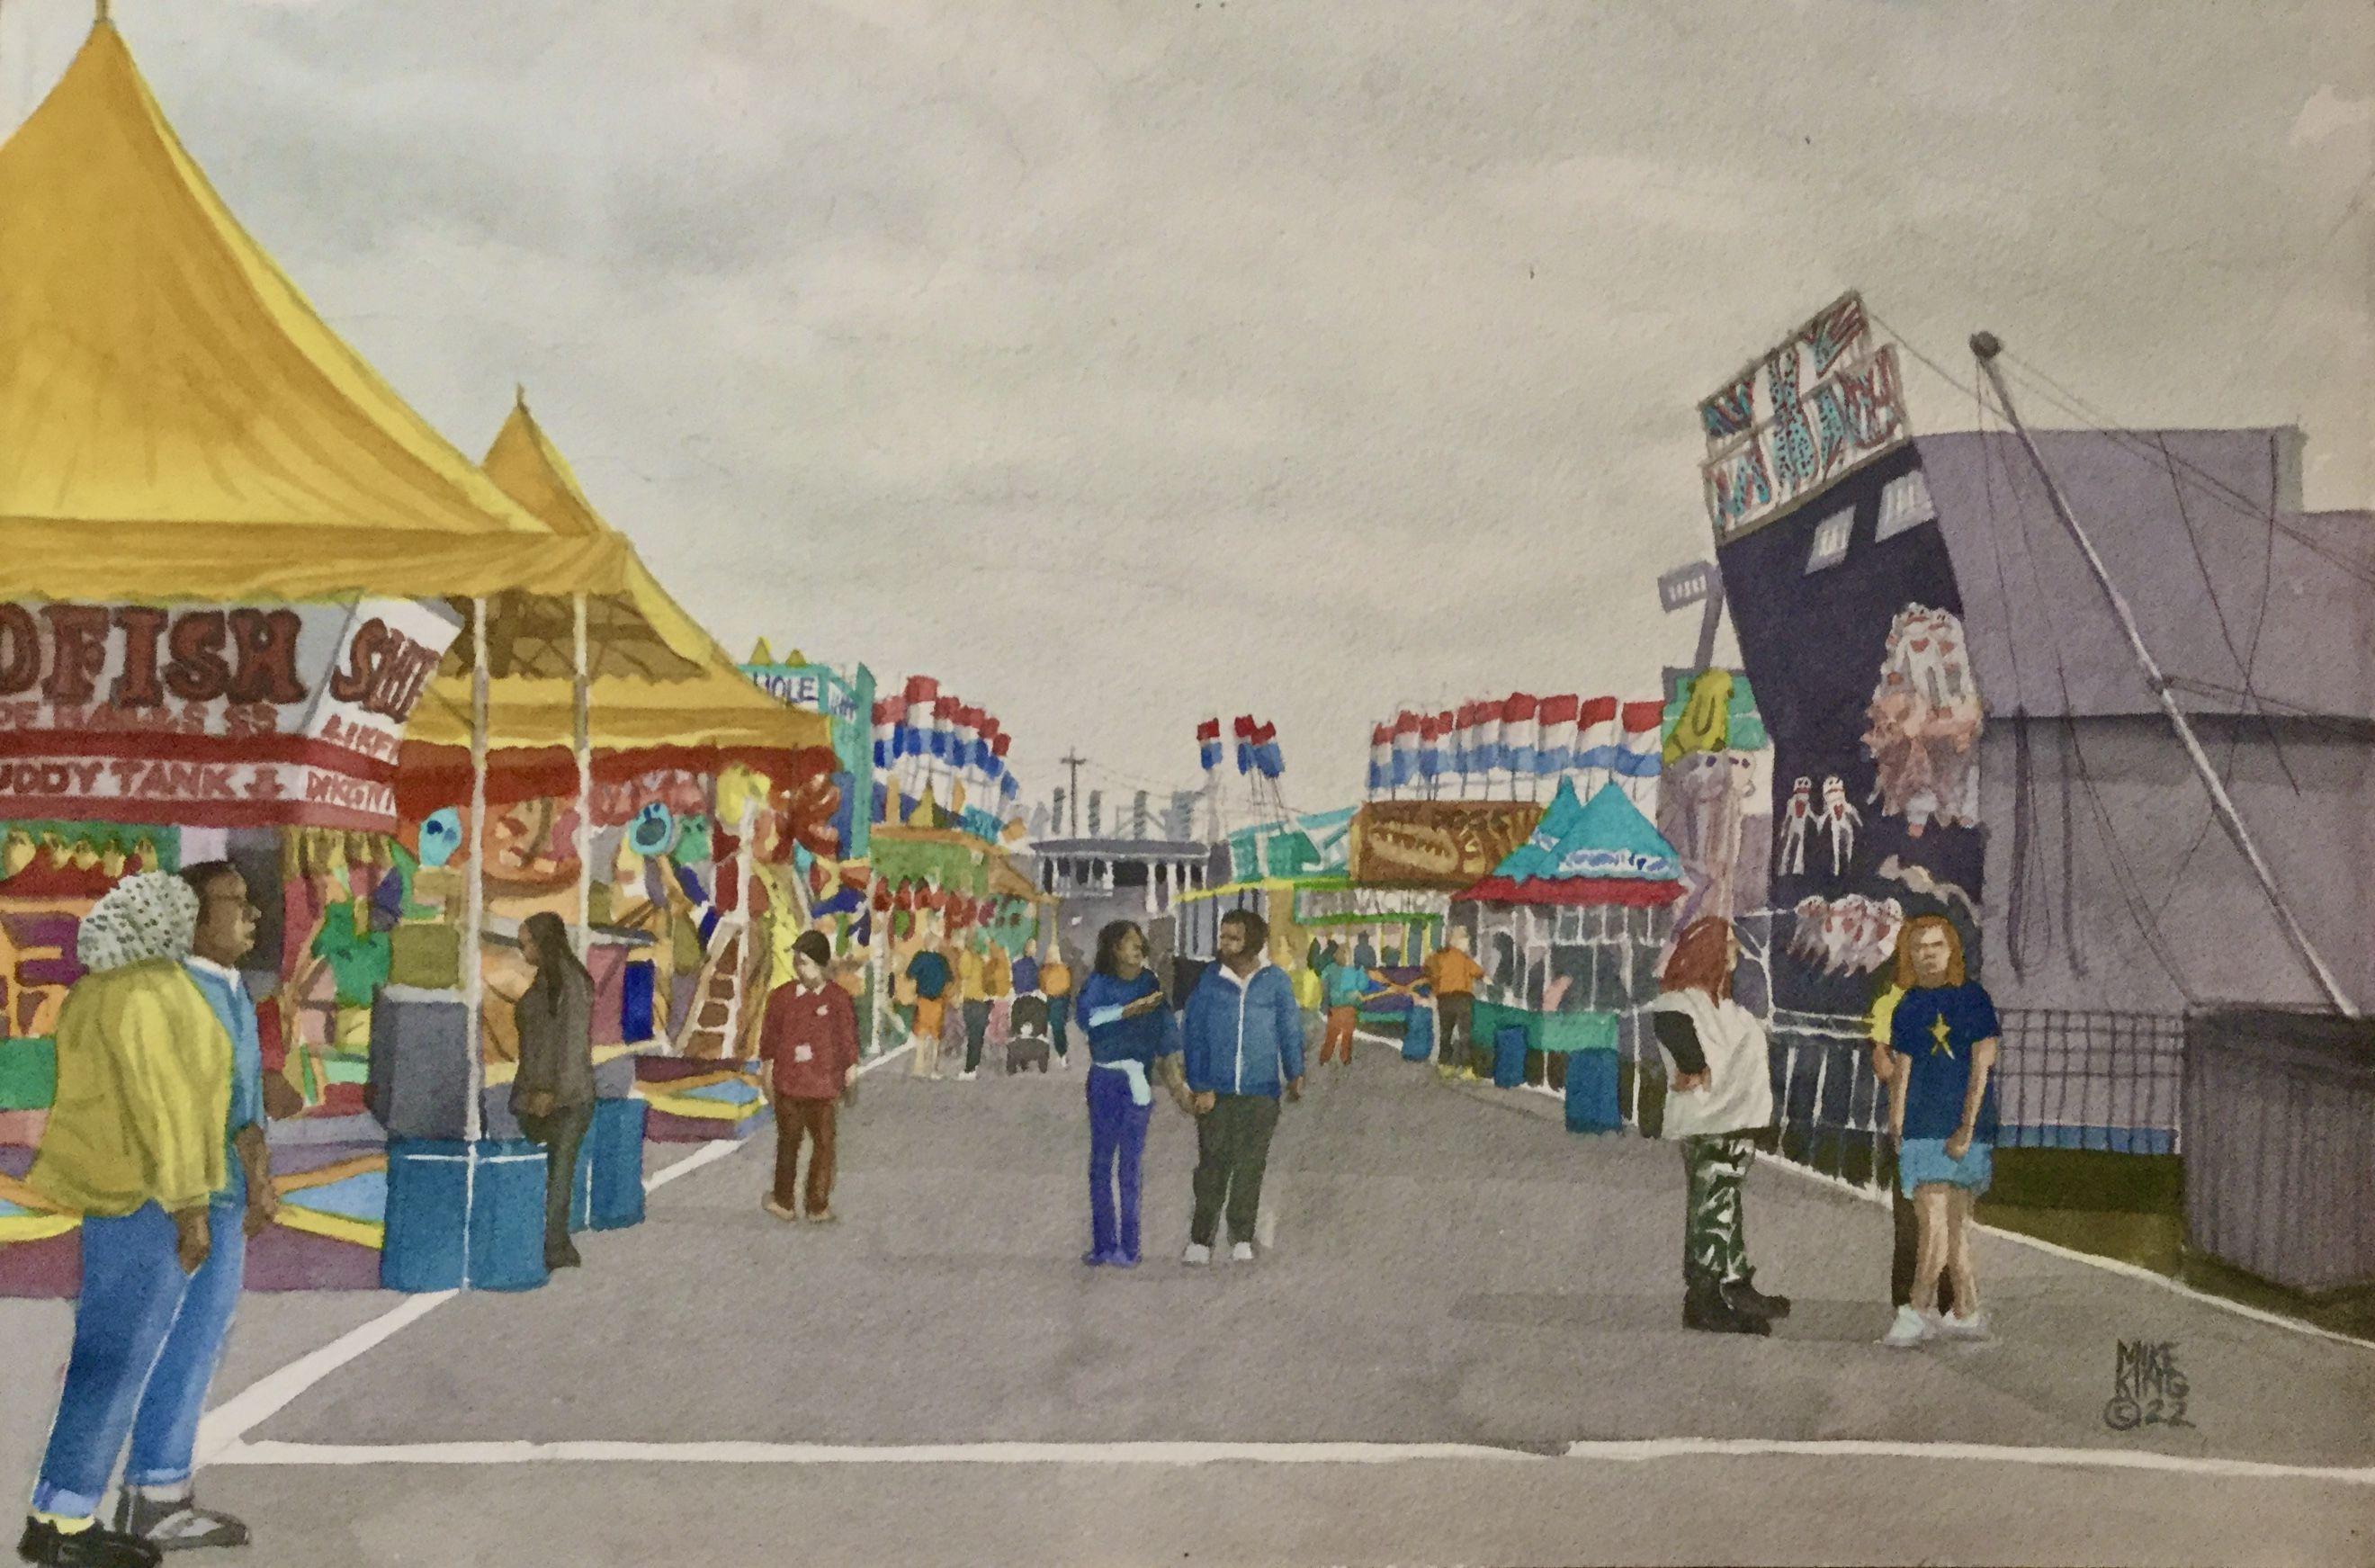 Midway at the Florida State Fair, Painting, Watercolor on Watercolor Paper - Art by Mike King